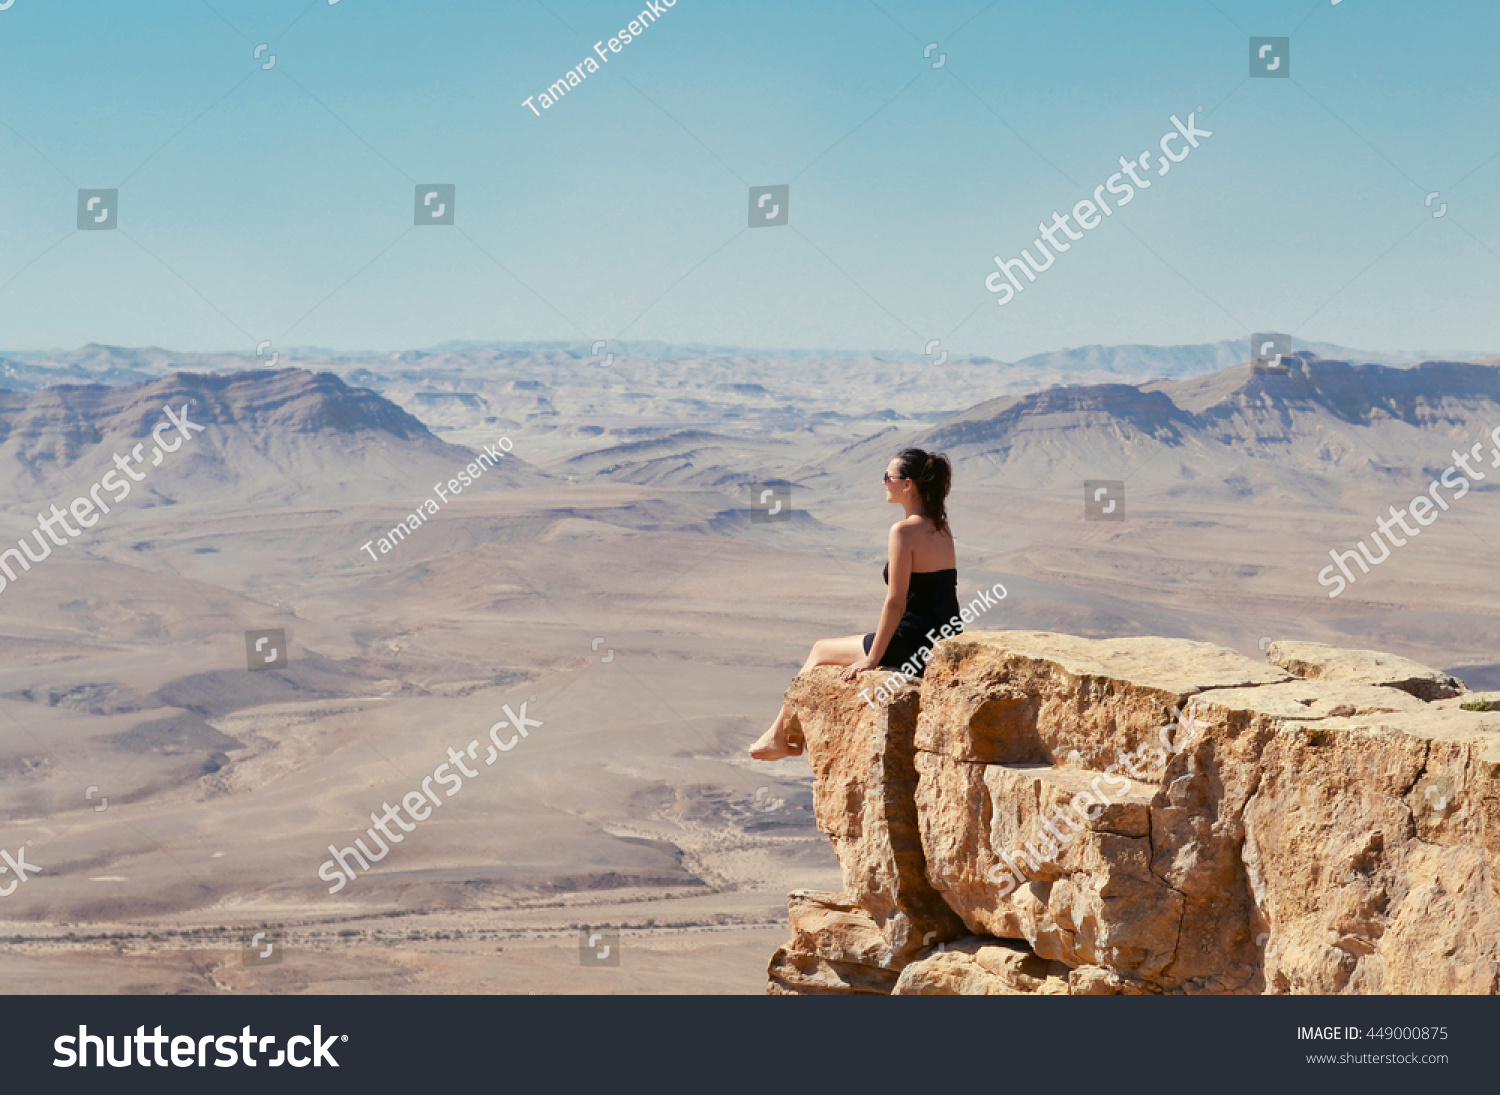 Girl sitting on a cliff and looking at desert Negev landscape. Summer vacation in Israel. #449000875